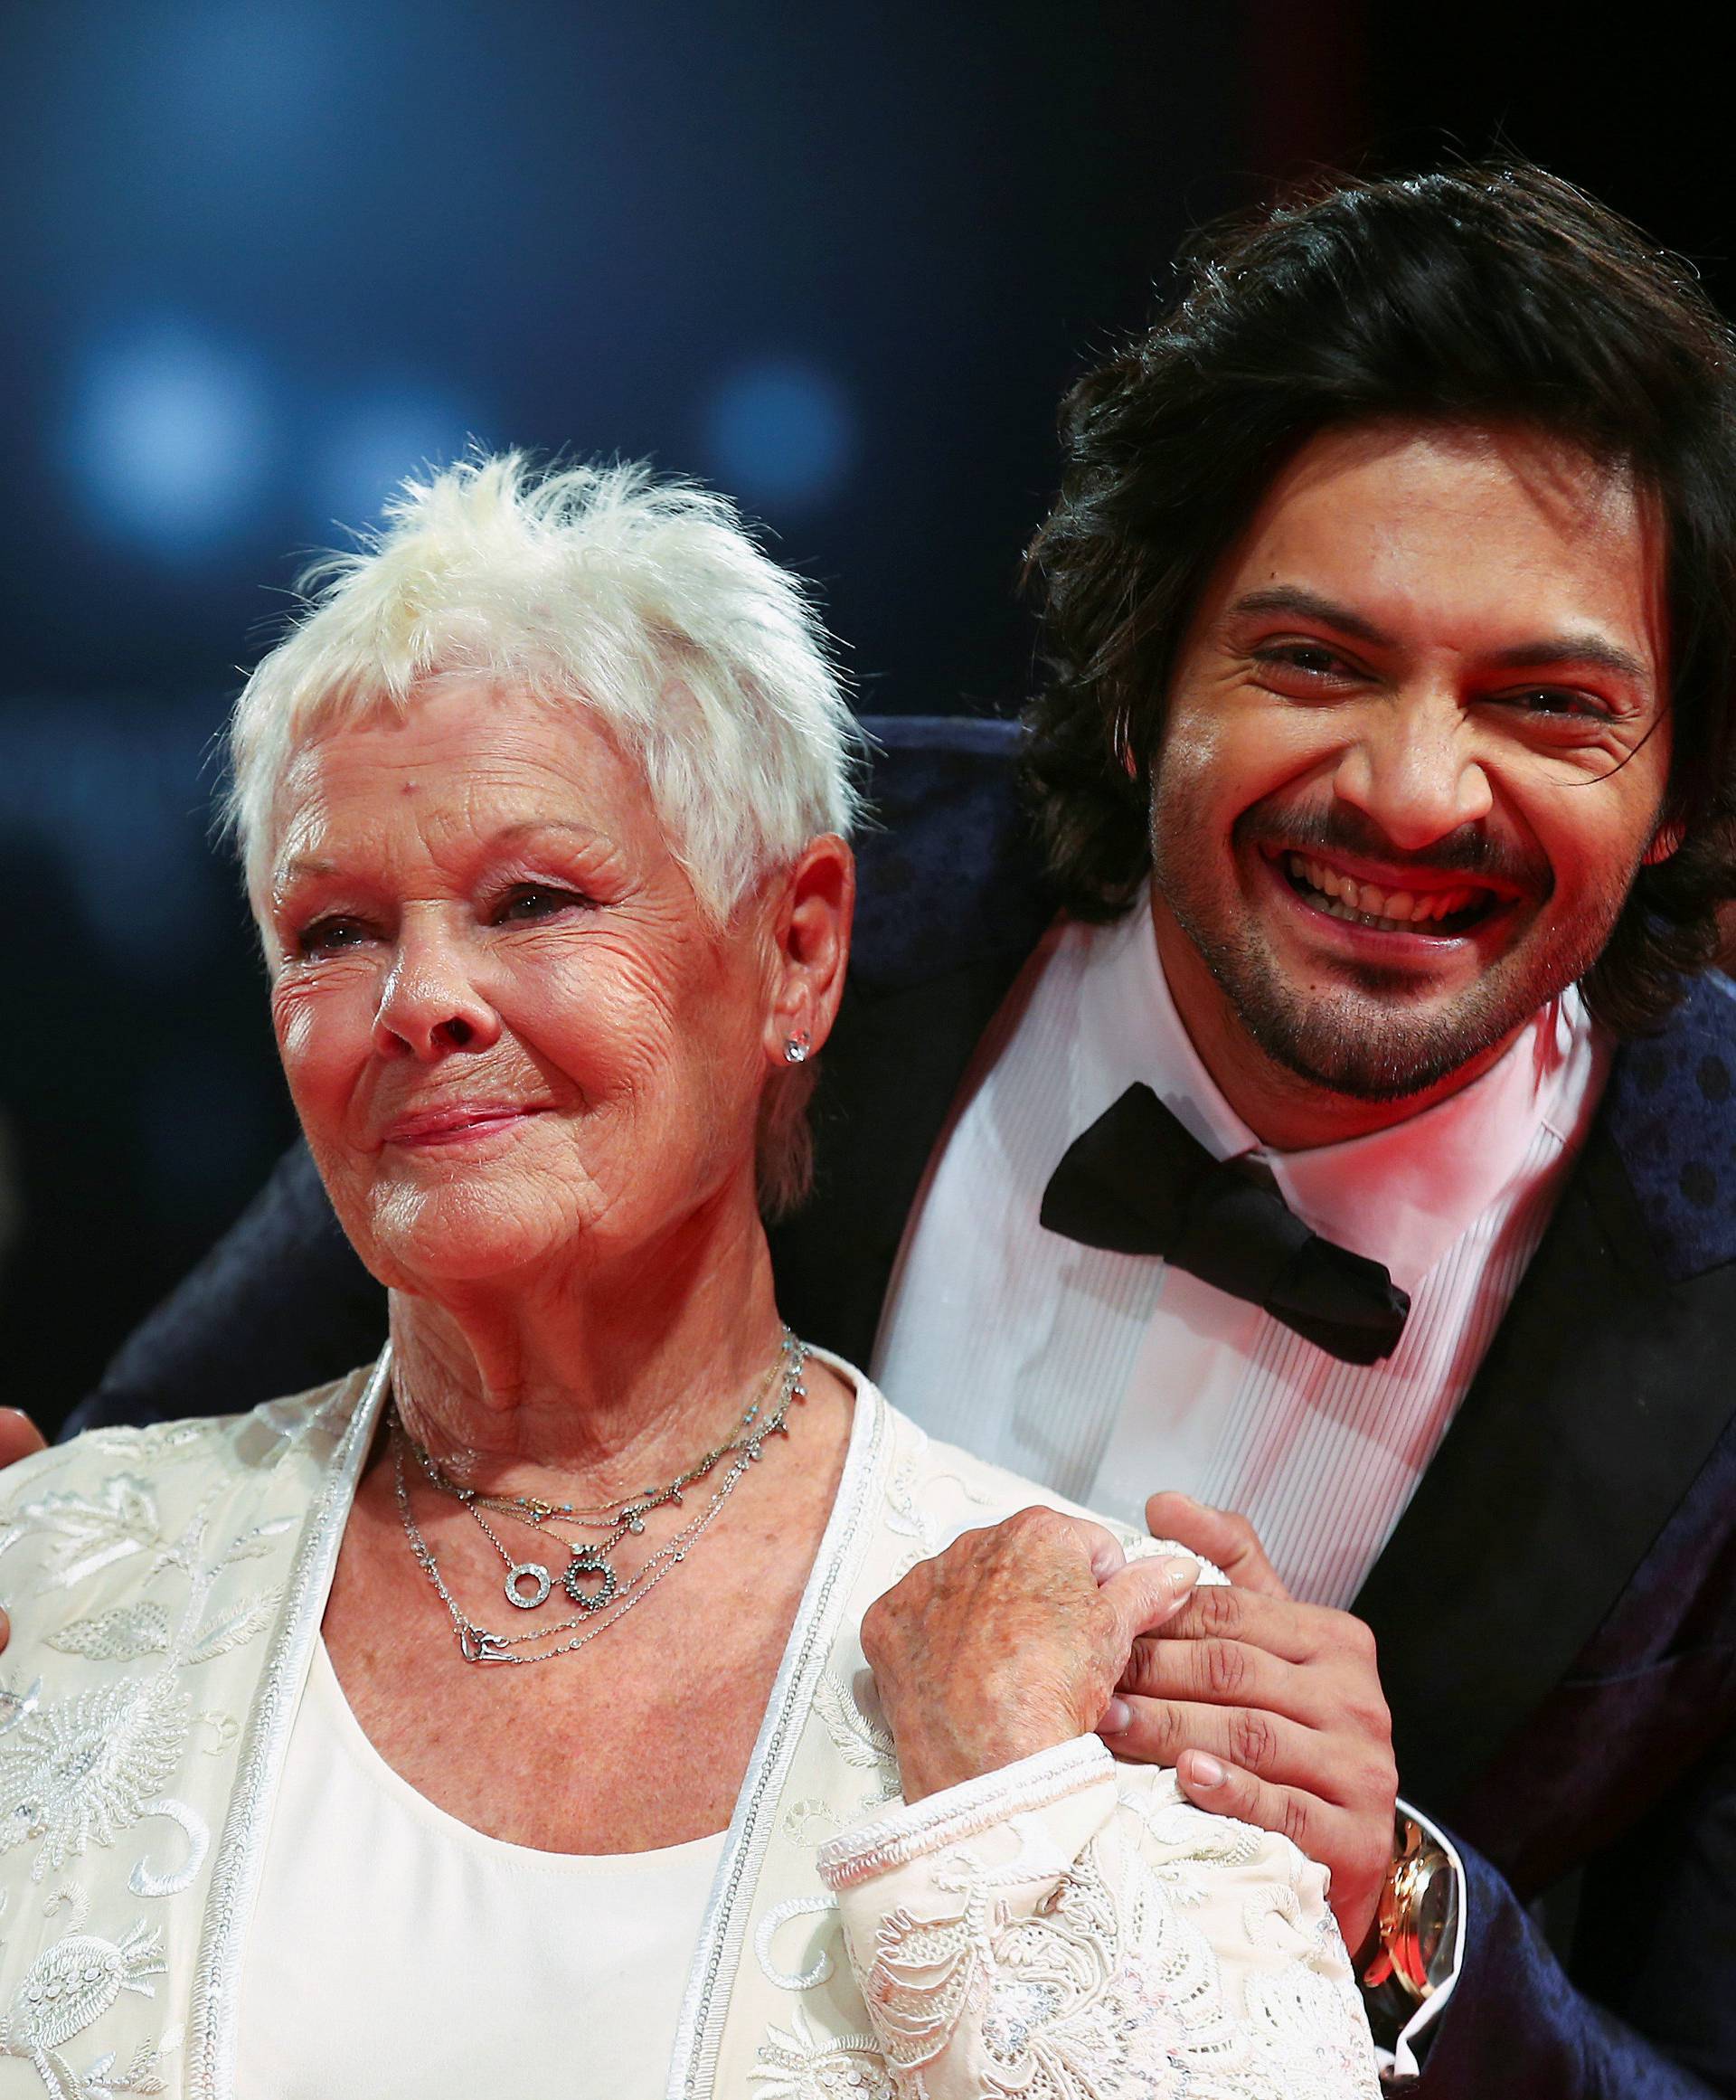 Actors Ali Fazal and Judi Dench pose during a red carpet for the movie "Victoria and Abdul" at the 74th Venice Film Festival in Venice